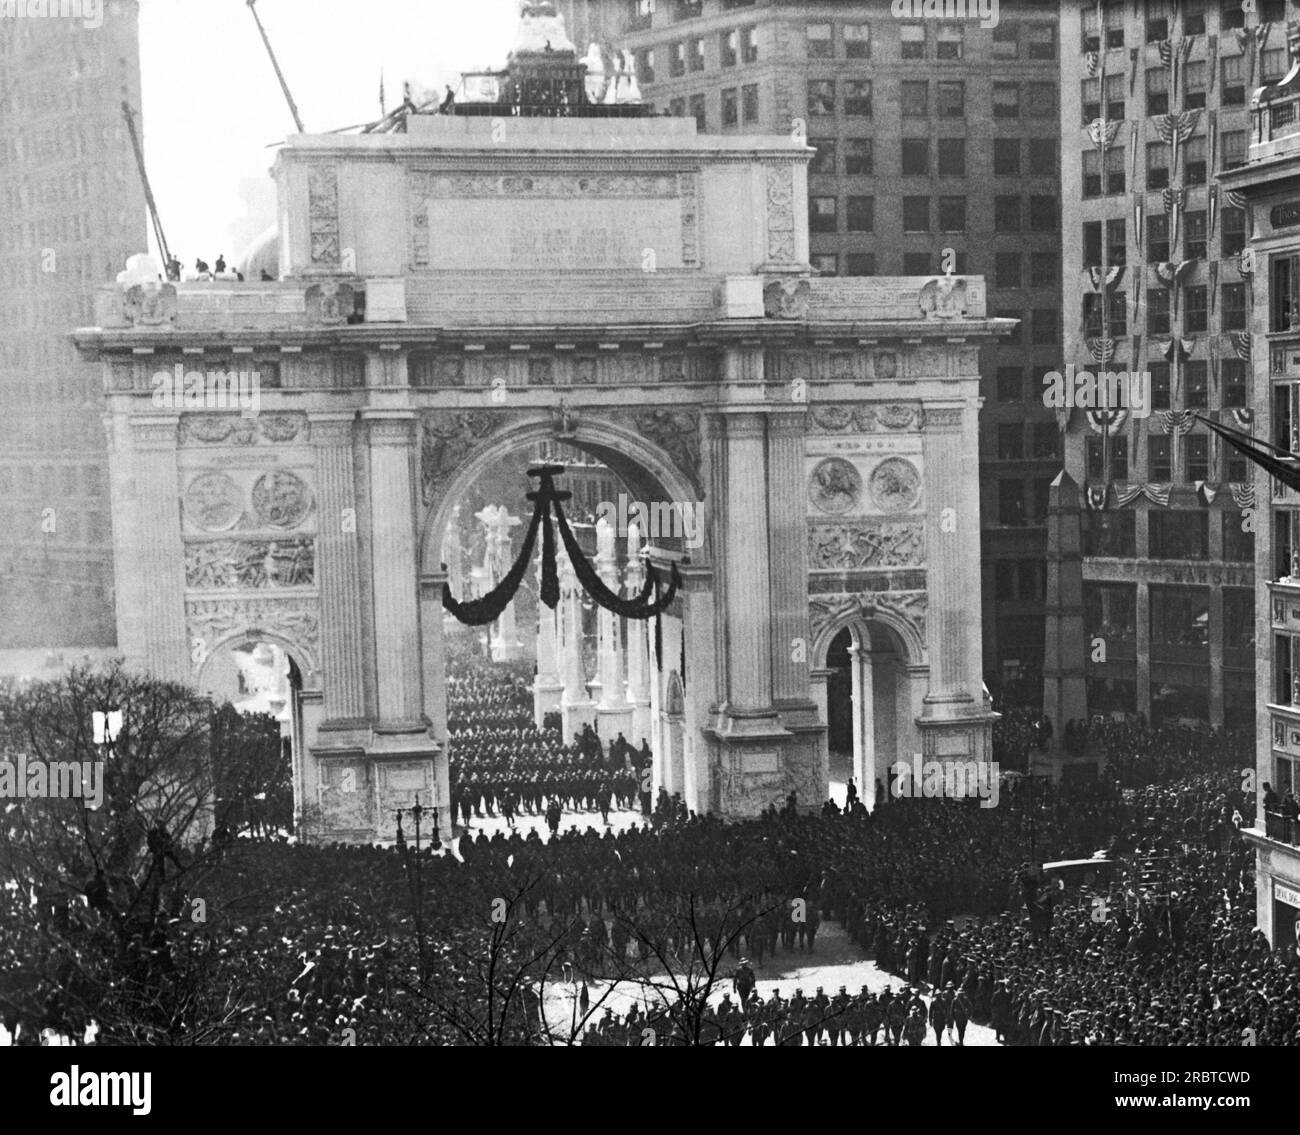 New York, New York:  March 25, 1919 Men of the 27th Division passing through the Victory Arch on Fifth Avenue during the greatest military parade New York ever held. Stock Photo